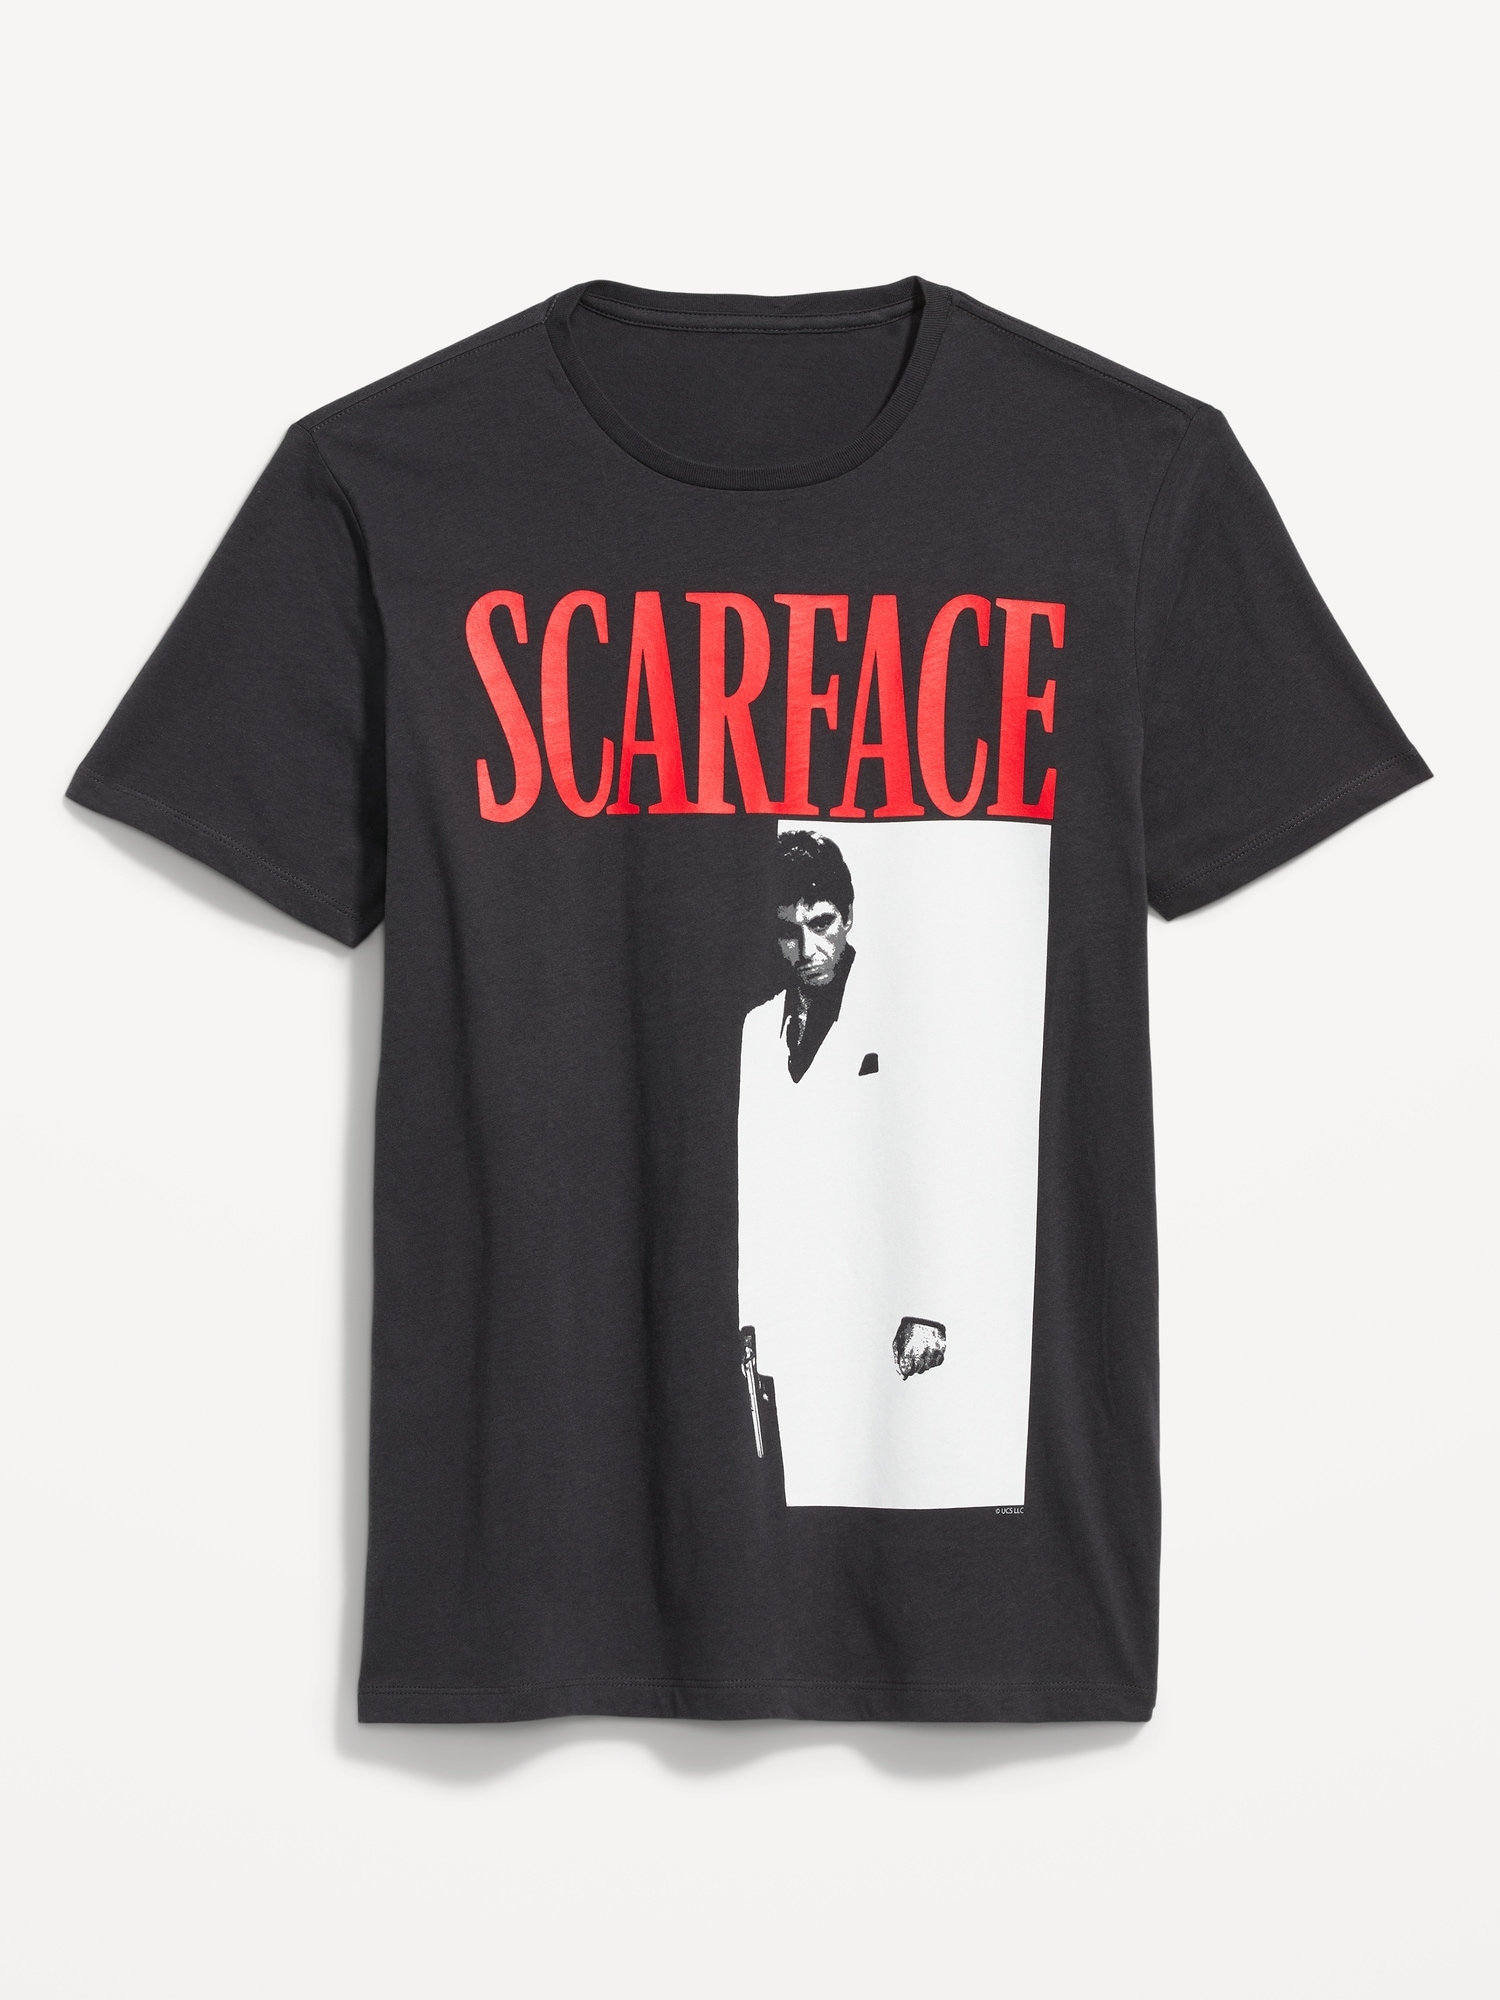 Scarface Gender-Neutral T-Shirt for Adults